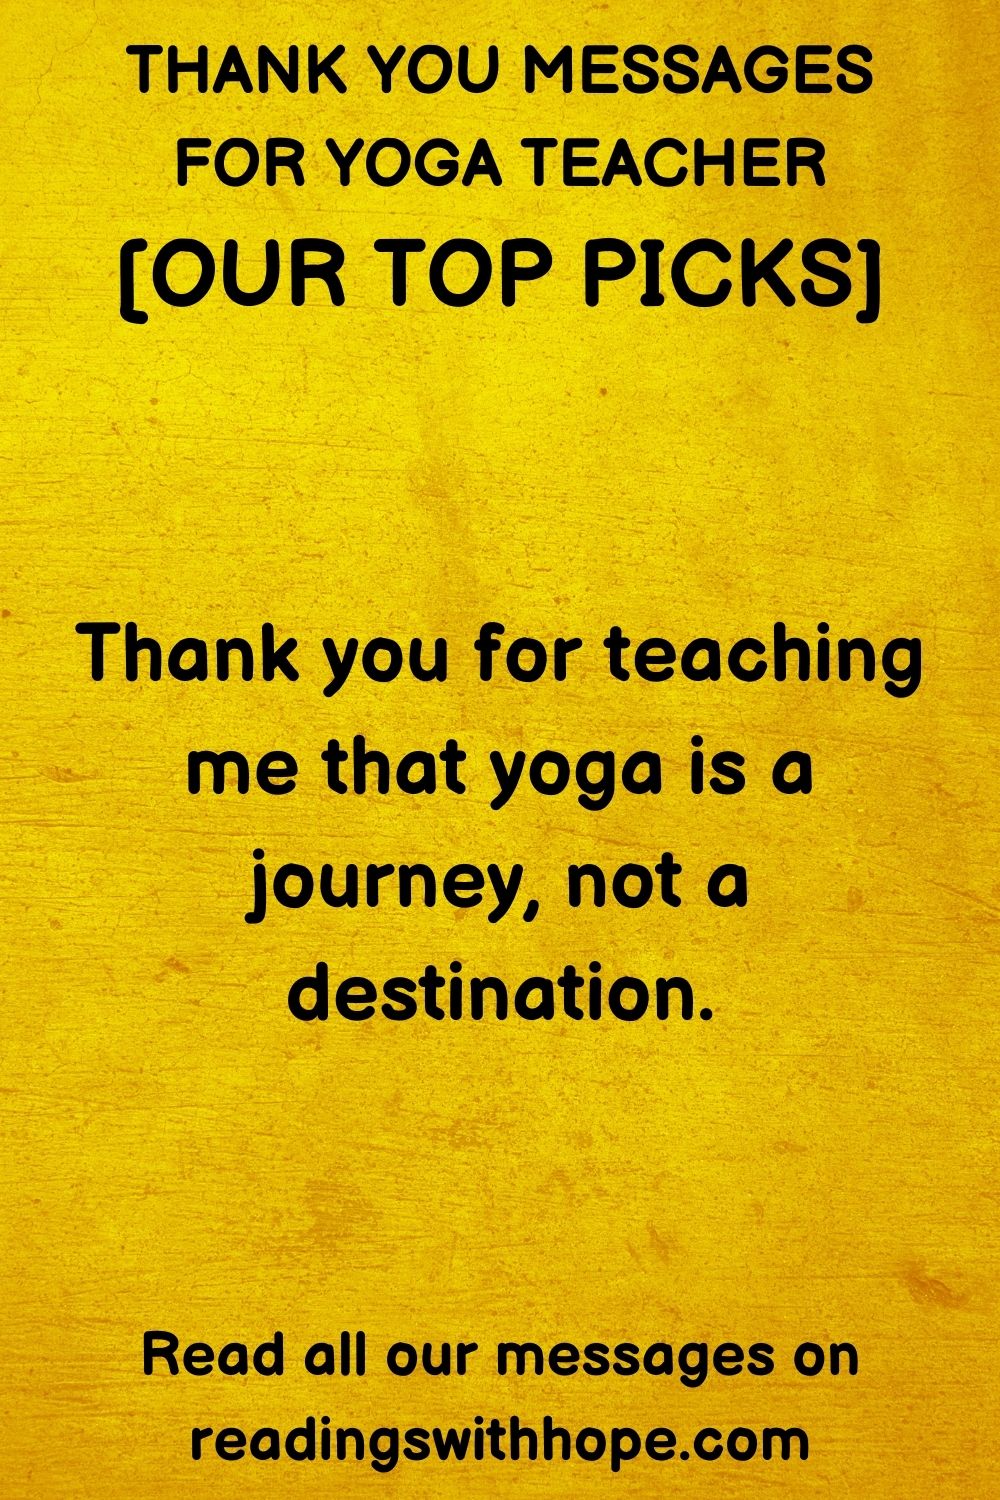 thank you message for yoga teacher that says Thank you for teaching me that yoga is a journey, not a destination.